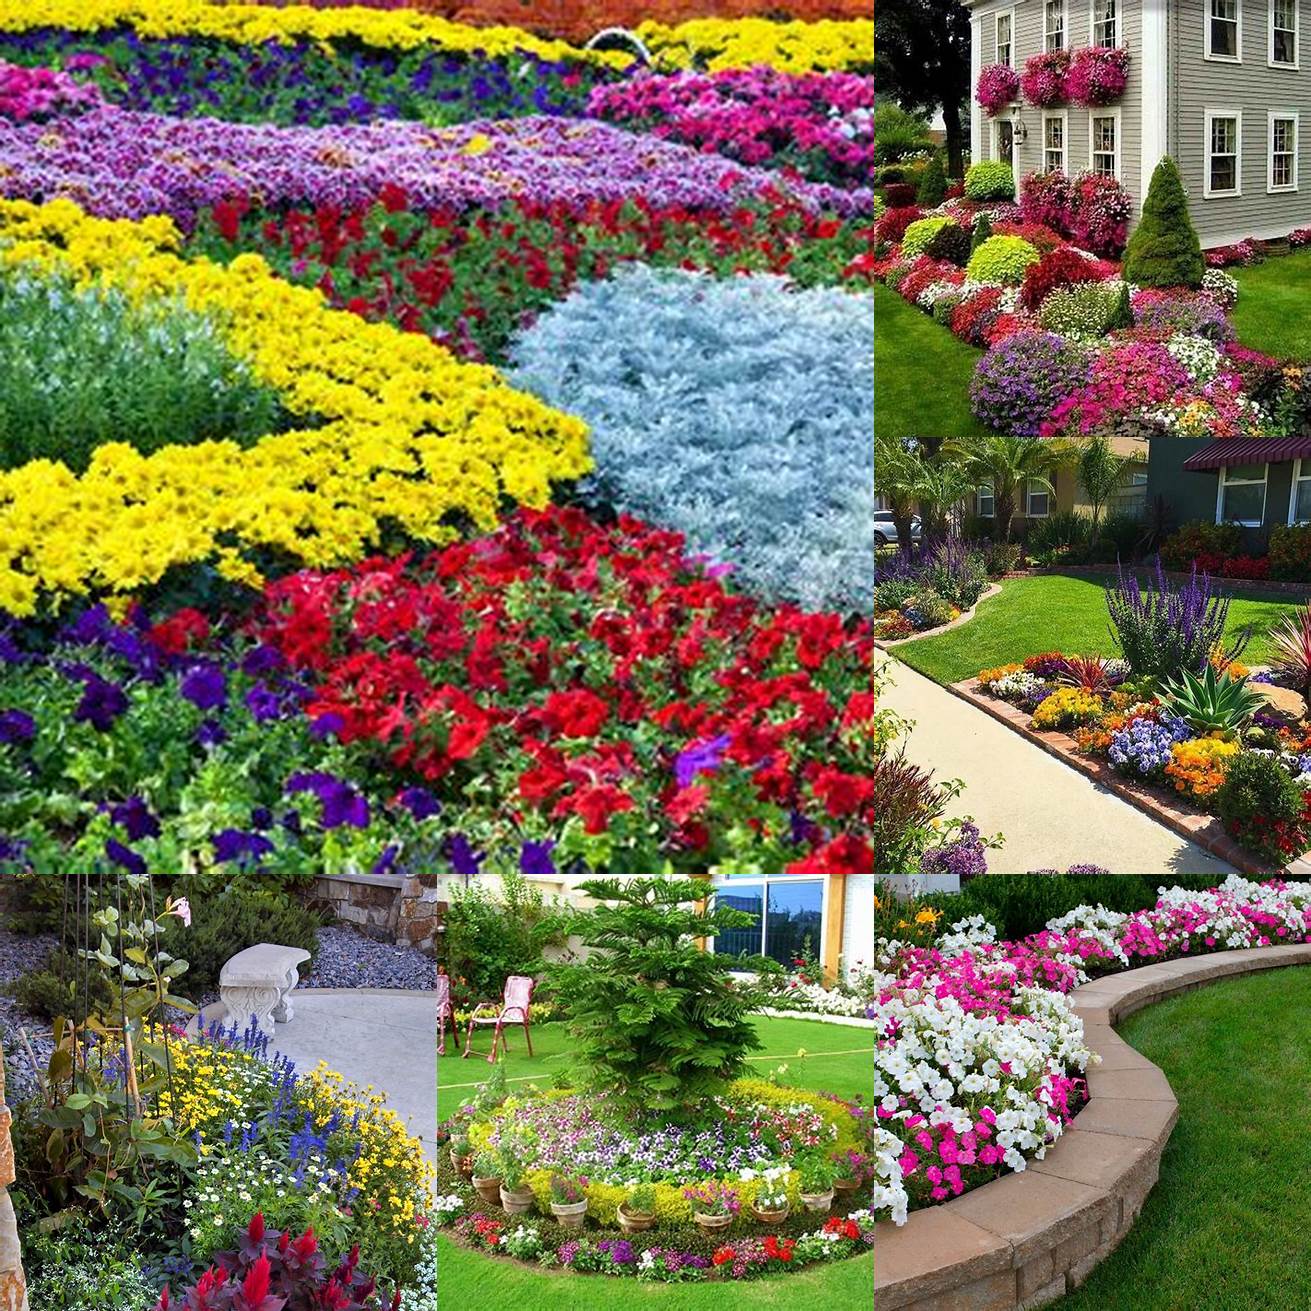 A colorful flower bed can add a vibrant touch to your garden